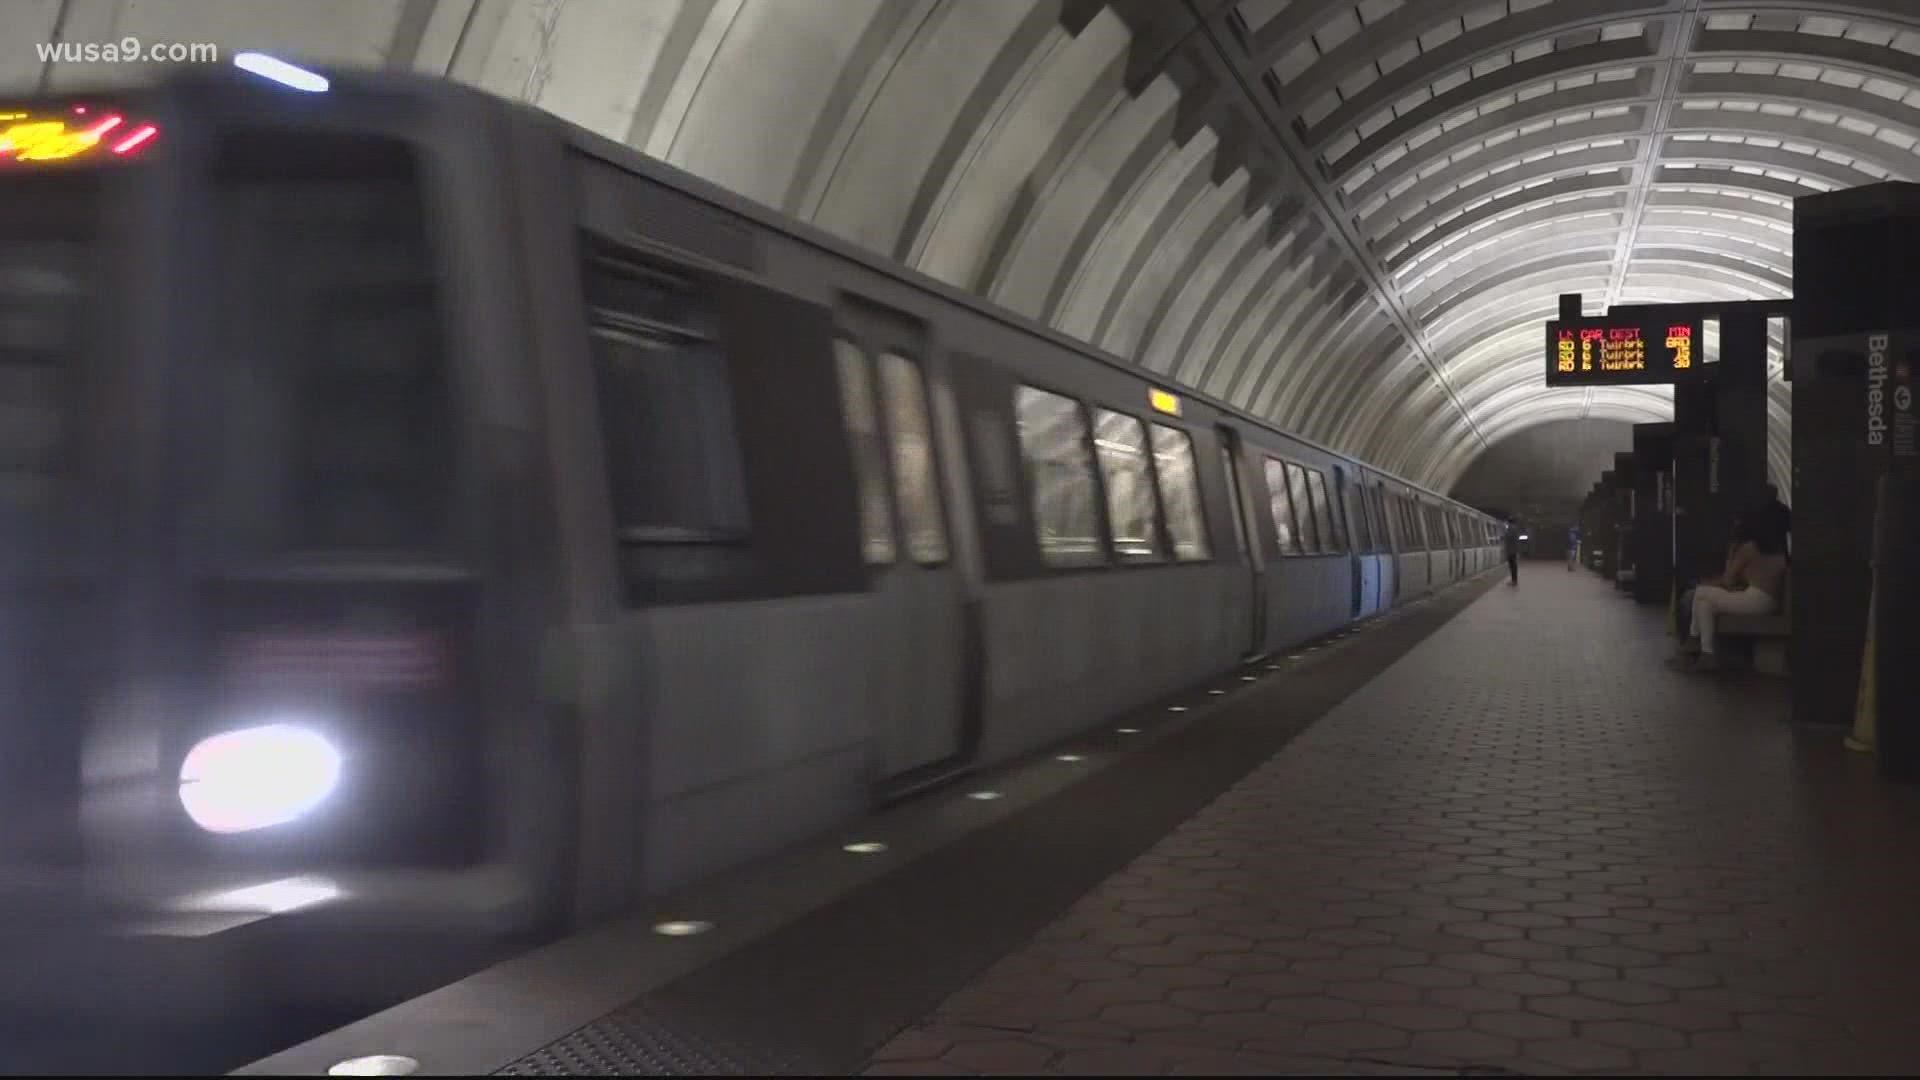 A tough new audit says Metro's emergency response puts riders and its own employees at risk.
But the auditor also found the agency has made some improvements.